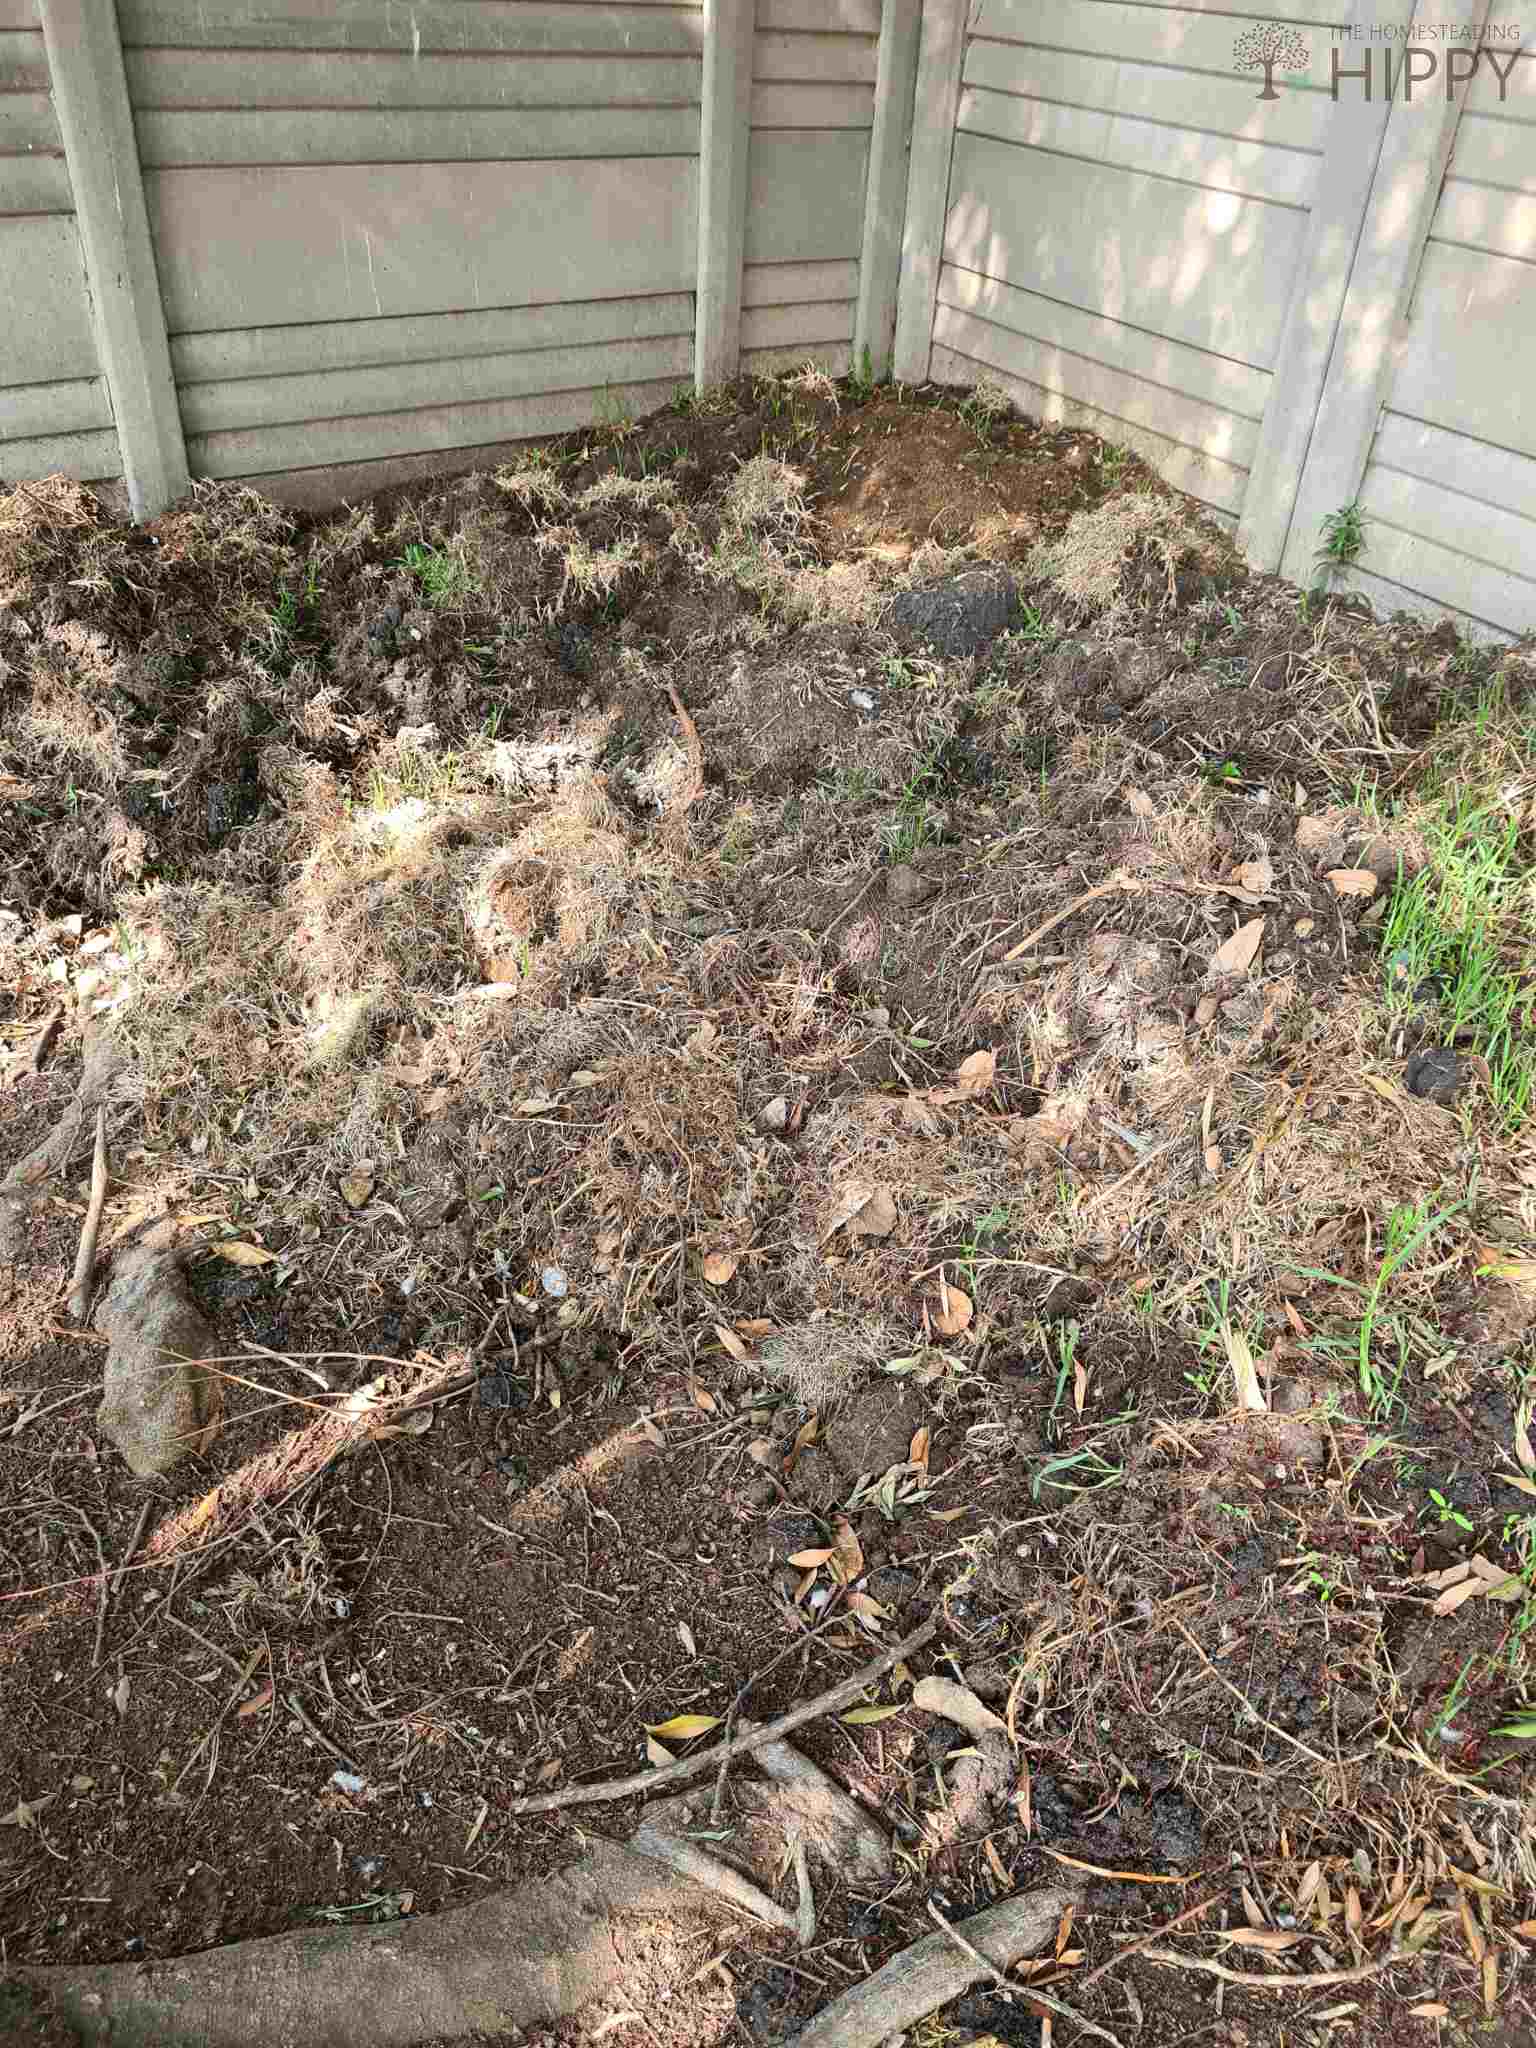 large compost area